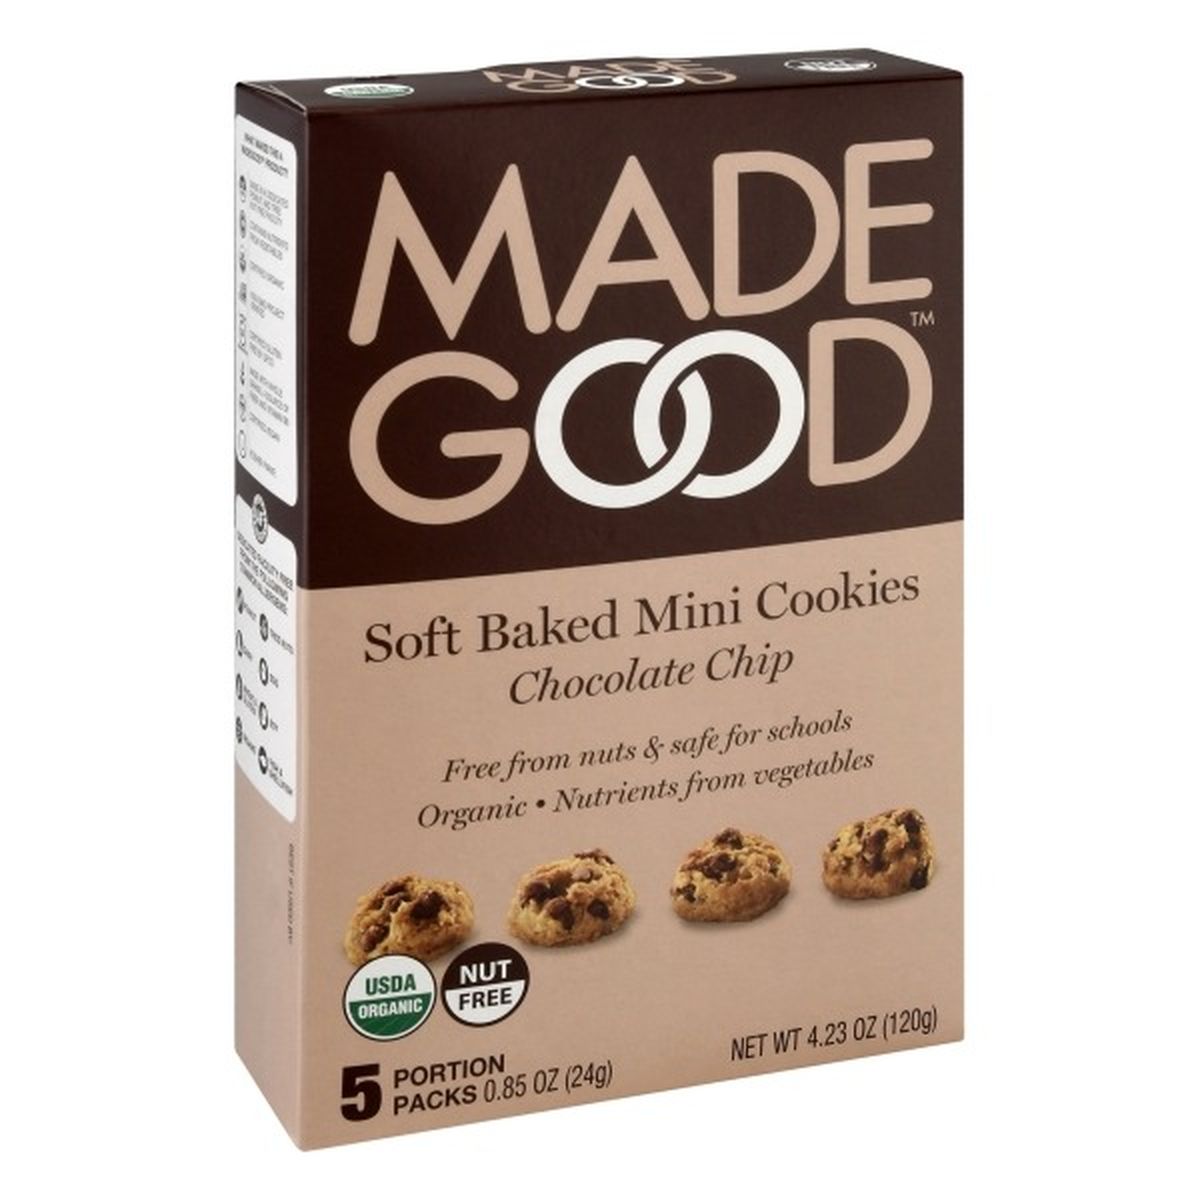 Calories in Made Good Mini Cookies, Chocolate Chip, Soft Baked